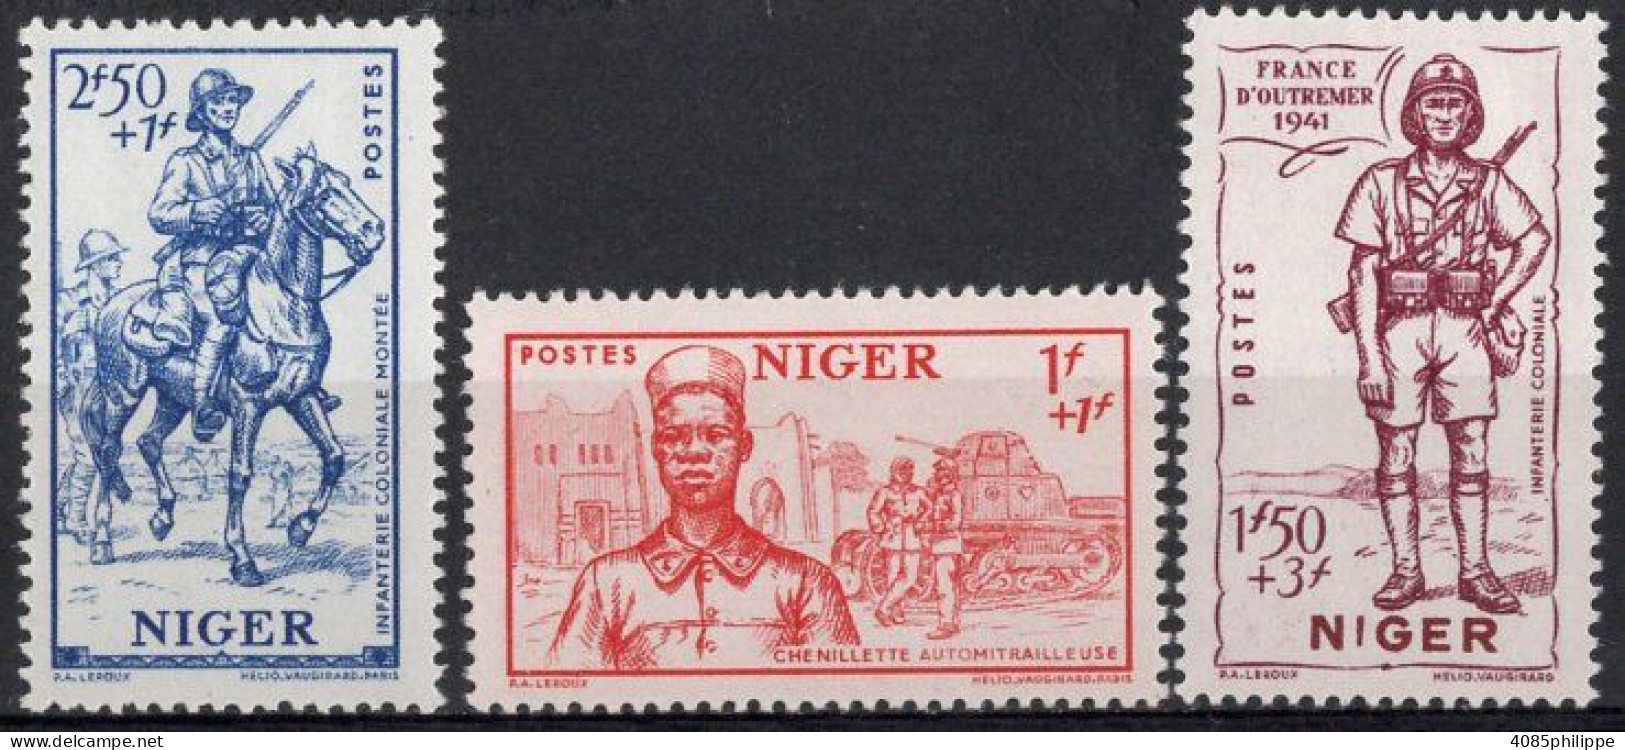 NIGER Timbres-poste N°86* à 88* Neufs Charnières Cote : 5€25 - Unused Stamps